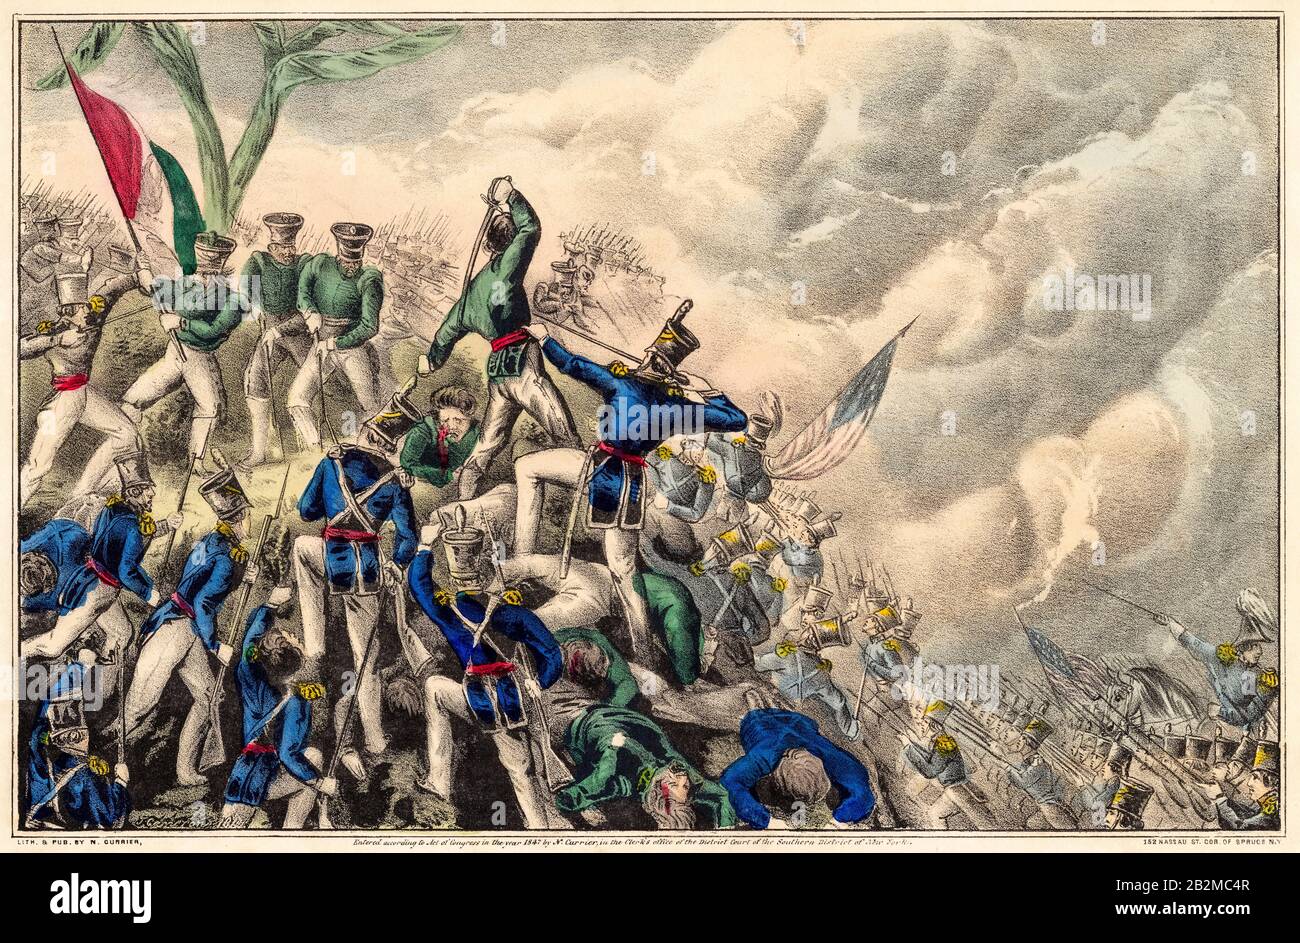 Battle of Cerro Gordo, April 18th 1847, during the Mexican-American War (1846-1848), print 1847 Stock Photo